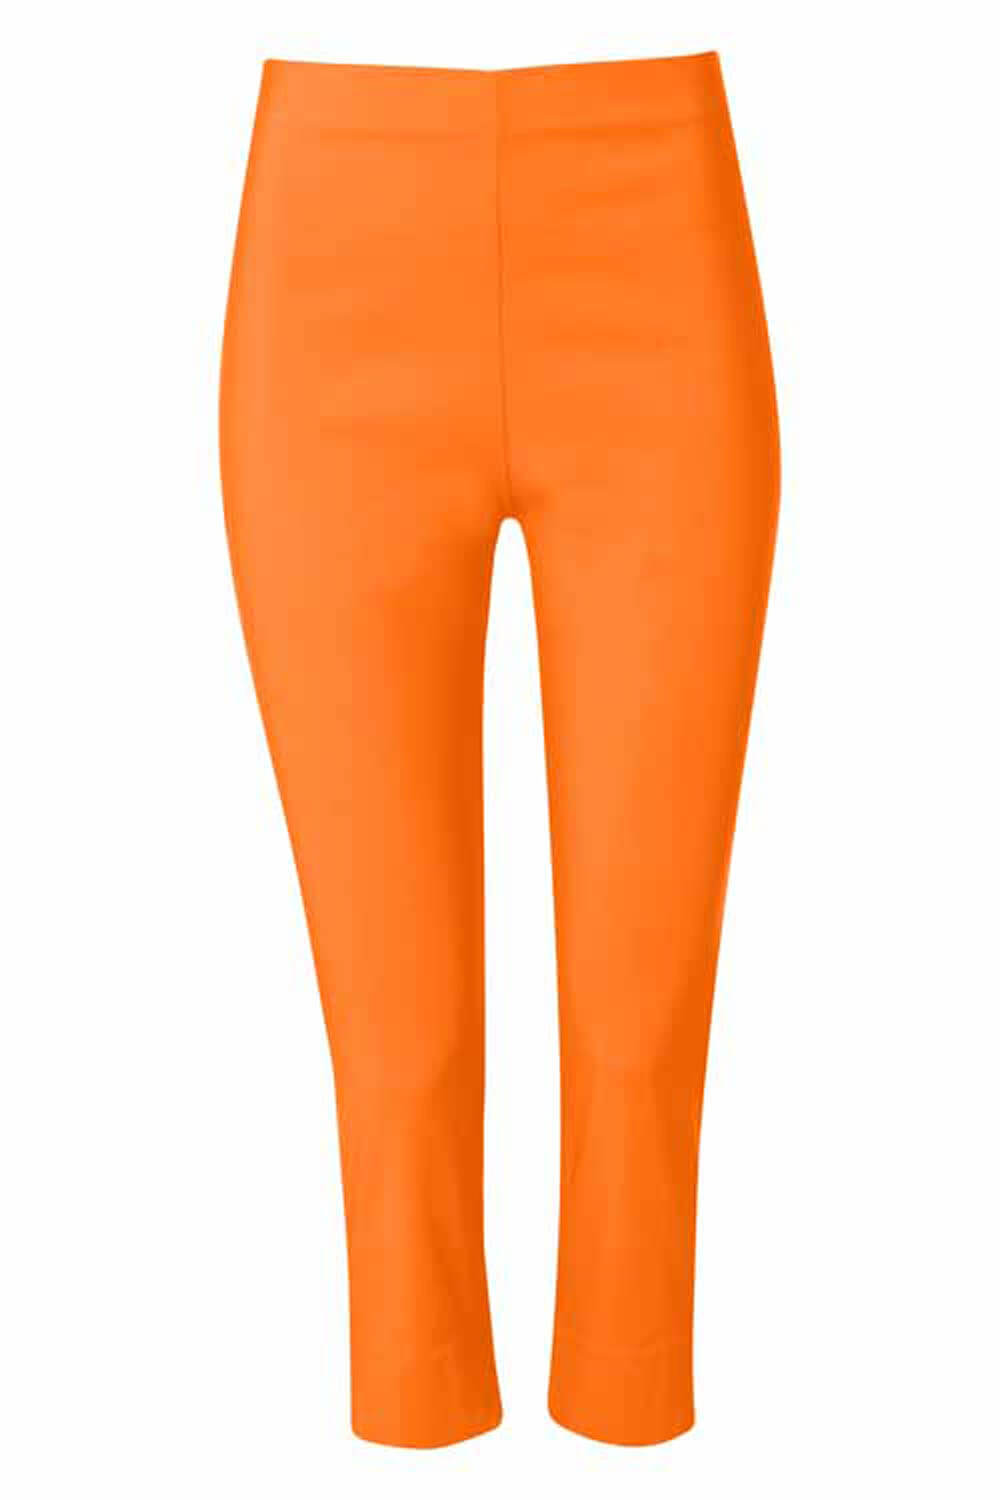 ORANGE Cropped Stretch Trouser, Image 6 of 6